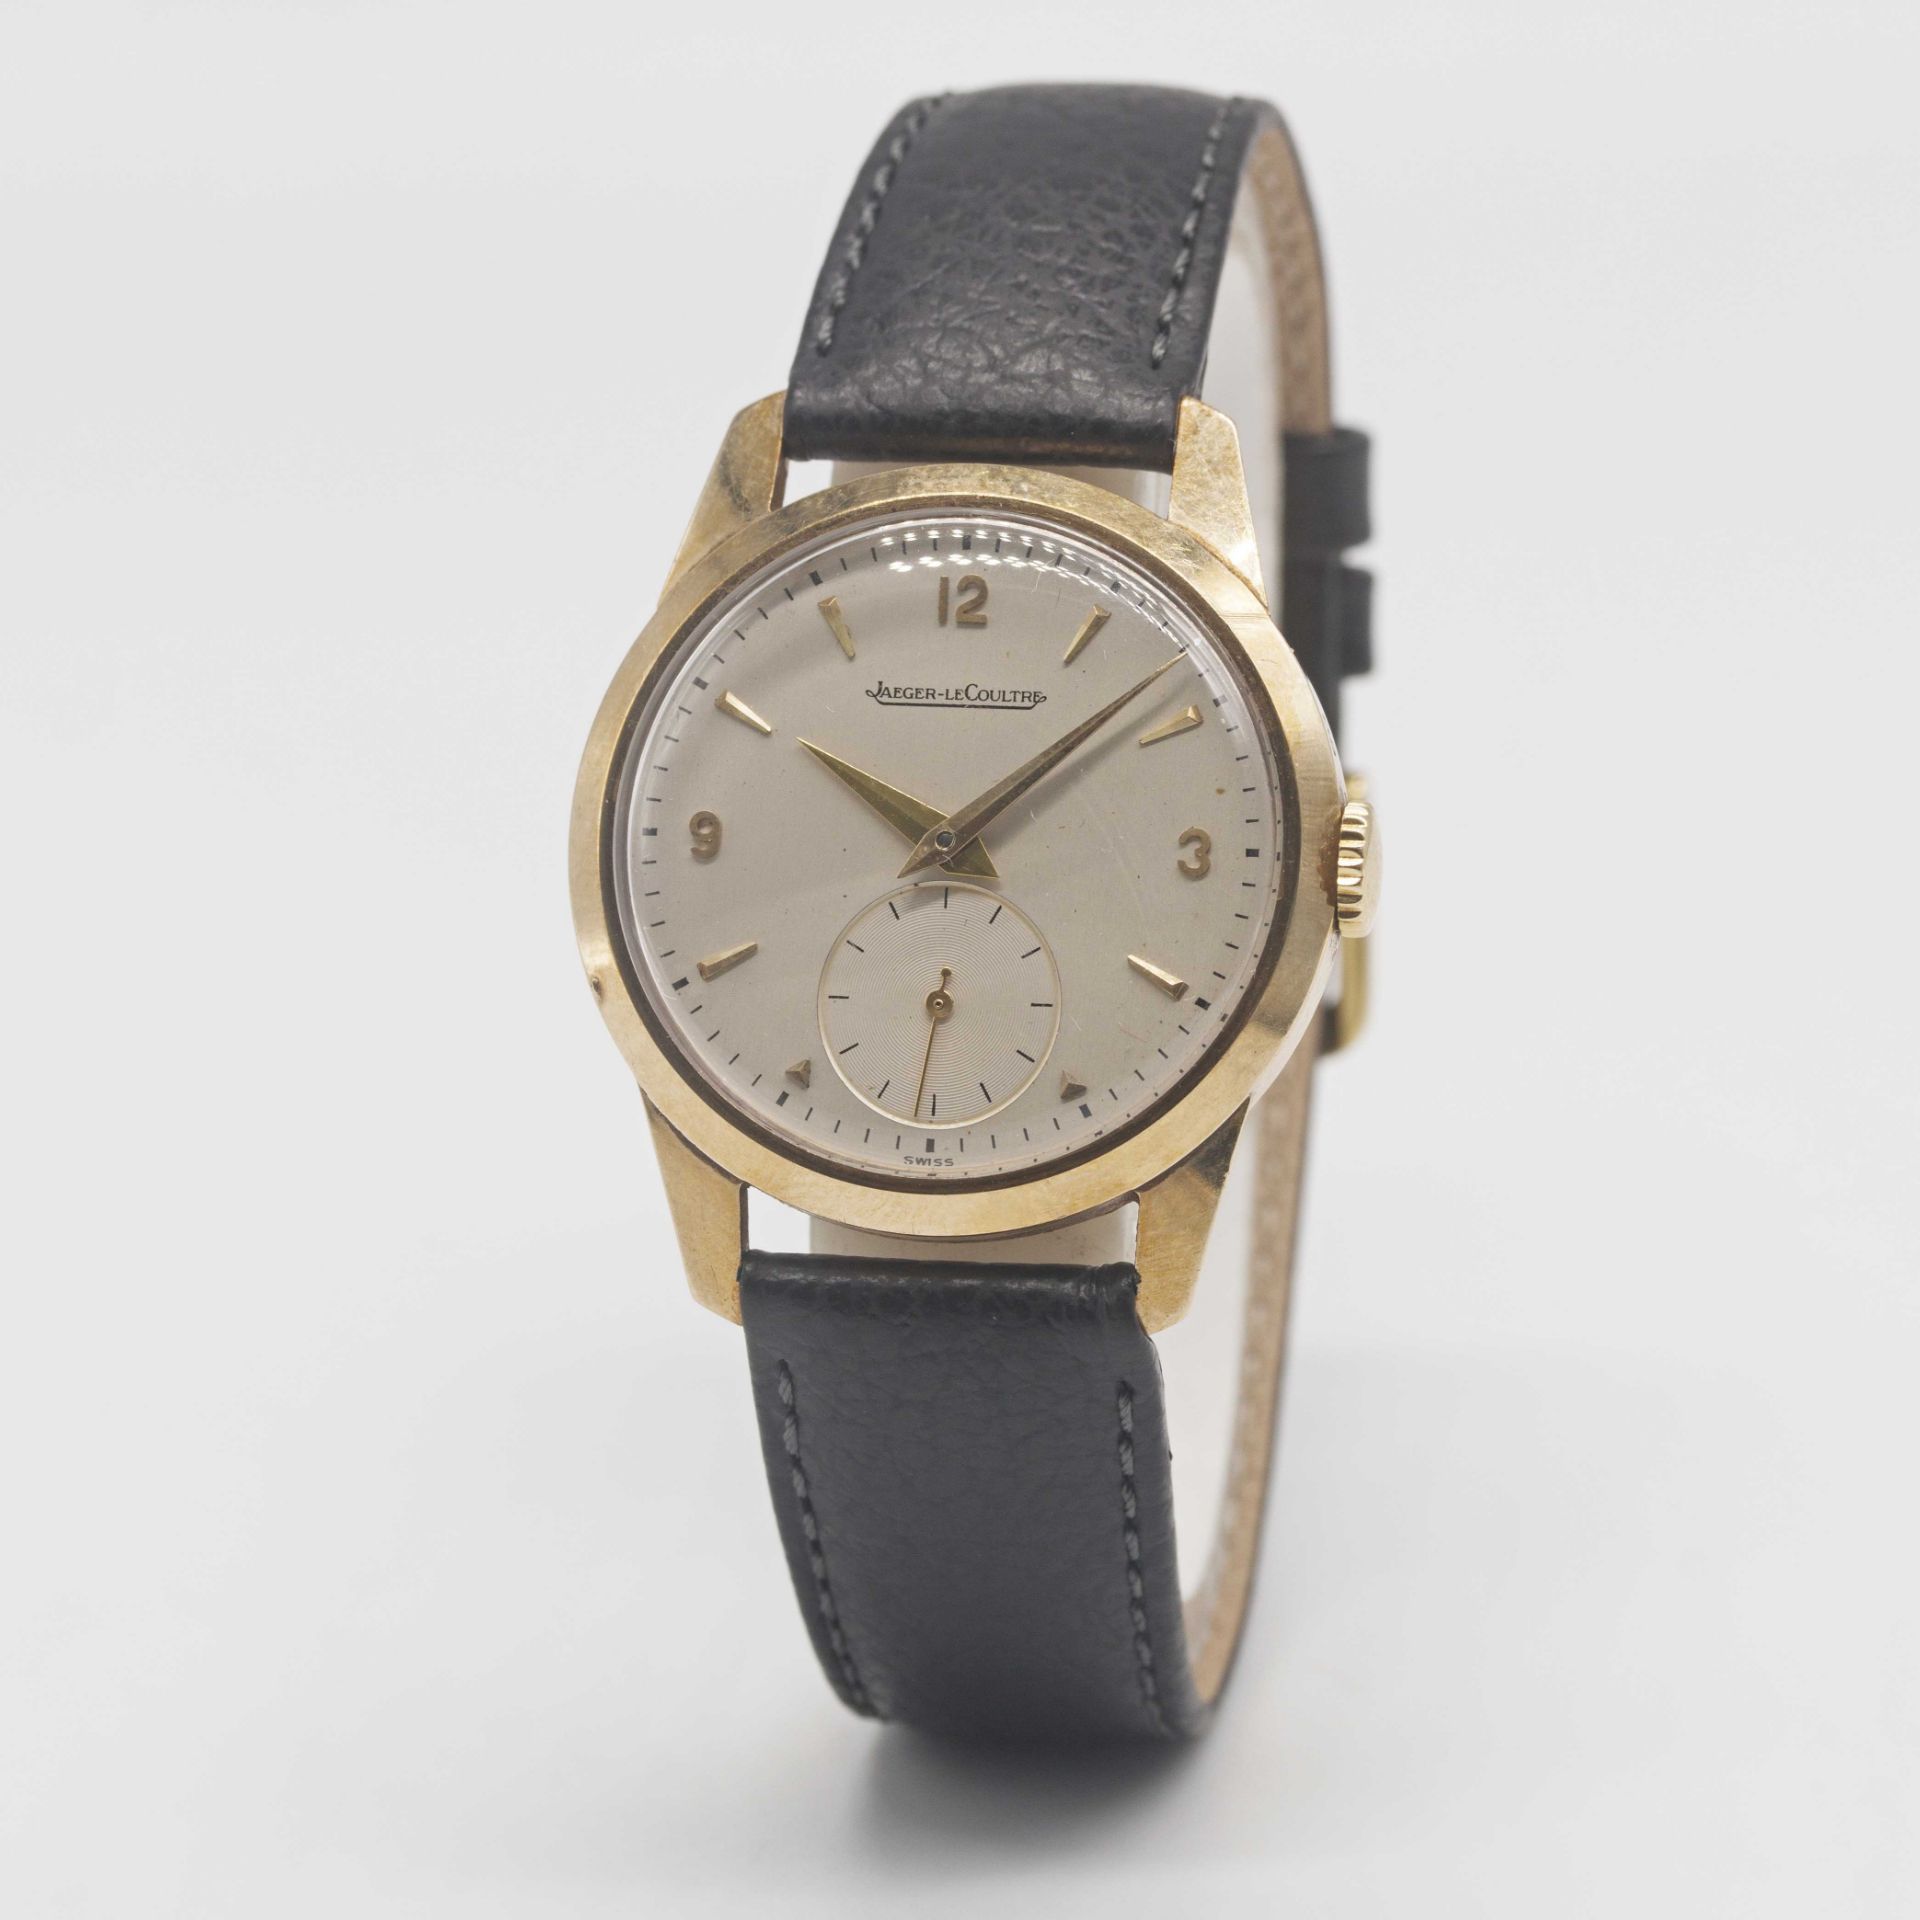 A GENTLEMAN'S 9CT SOLID GOLD JAEGER LECOULTRE WRIST WATCH CIRCA 1960s Movement: Manual wind, cal. - Image 3 of 7